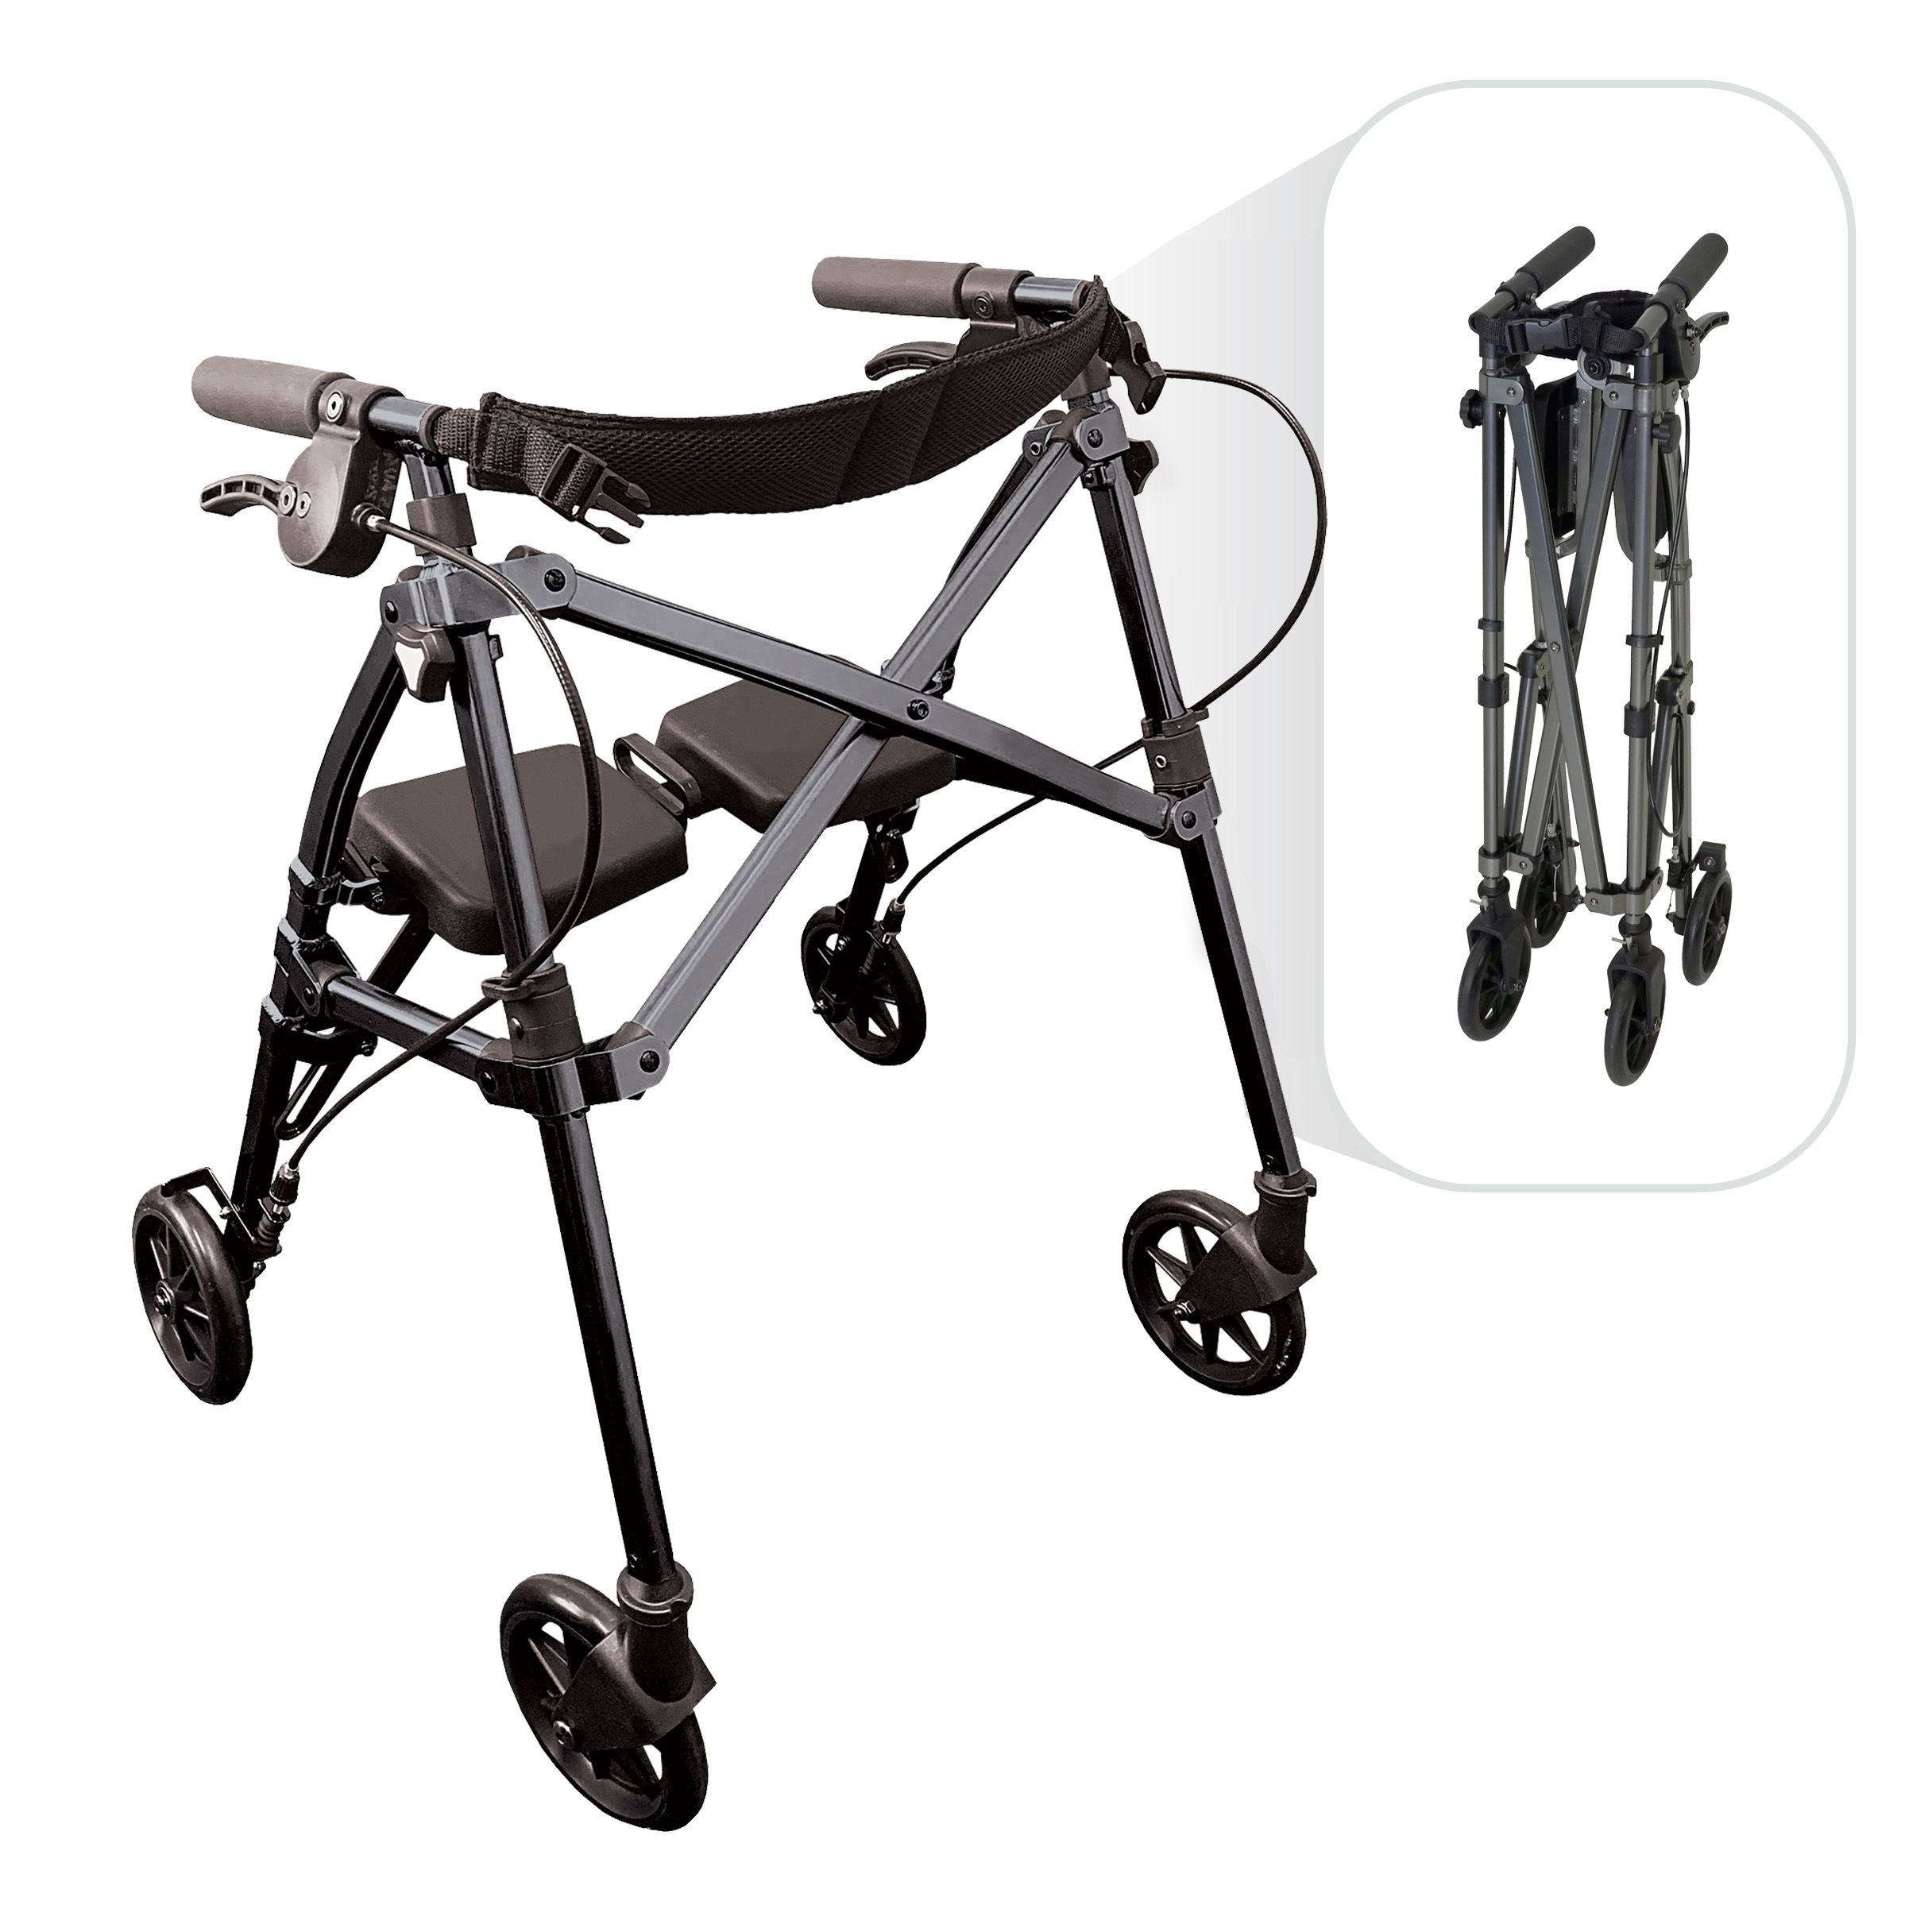 Able Life Space Saver Rollator Short, Lightweight Junior Folding Walker for Seniors, Petite Walker with Wheels and Seat, Black - image 4 of 8